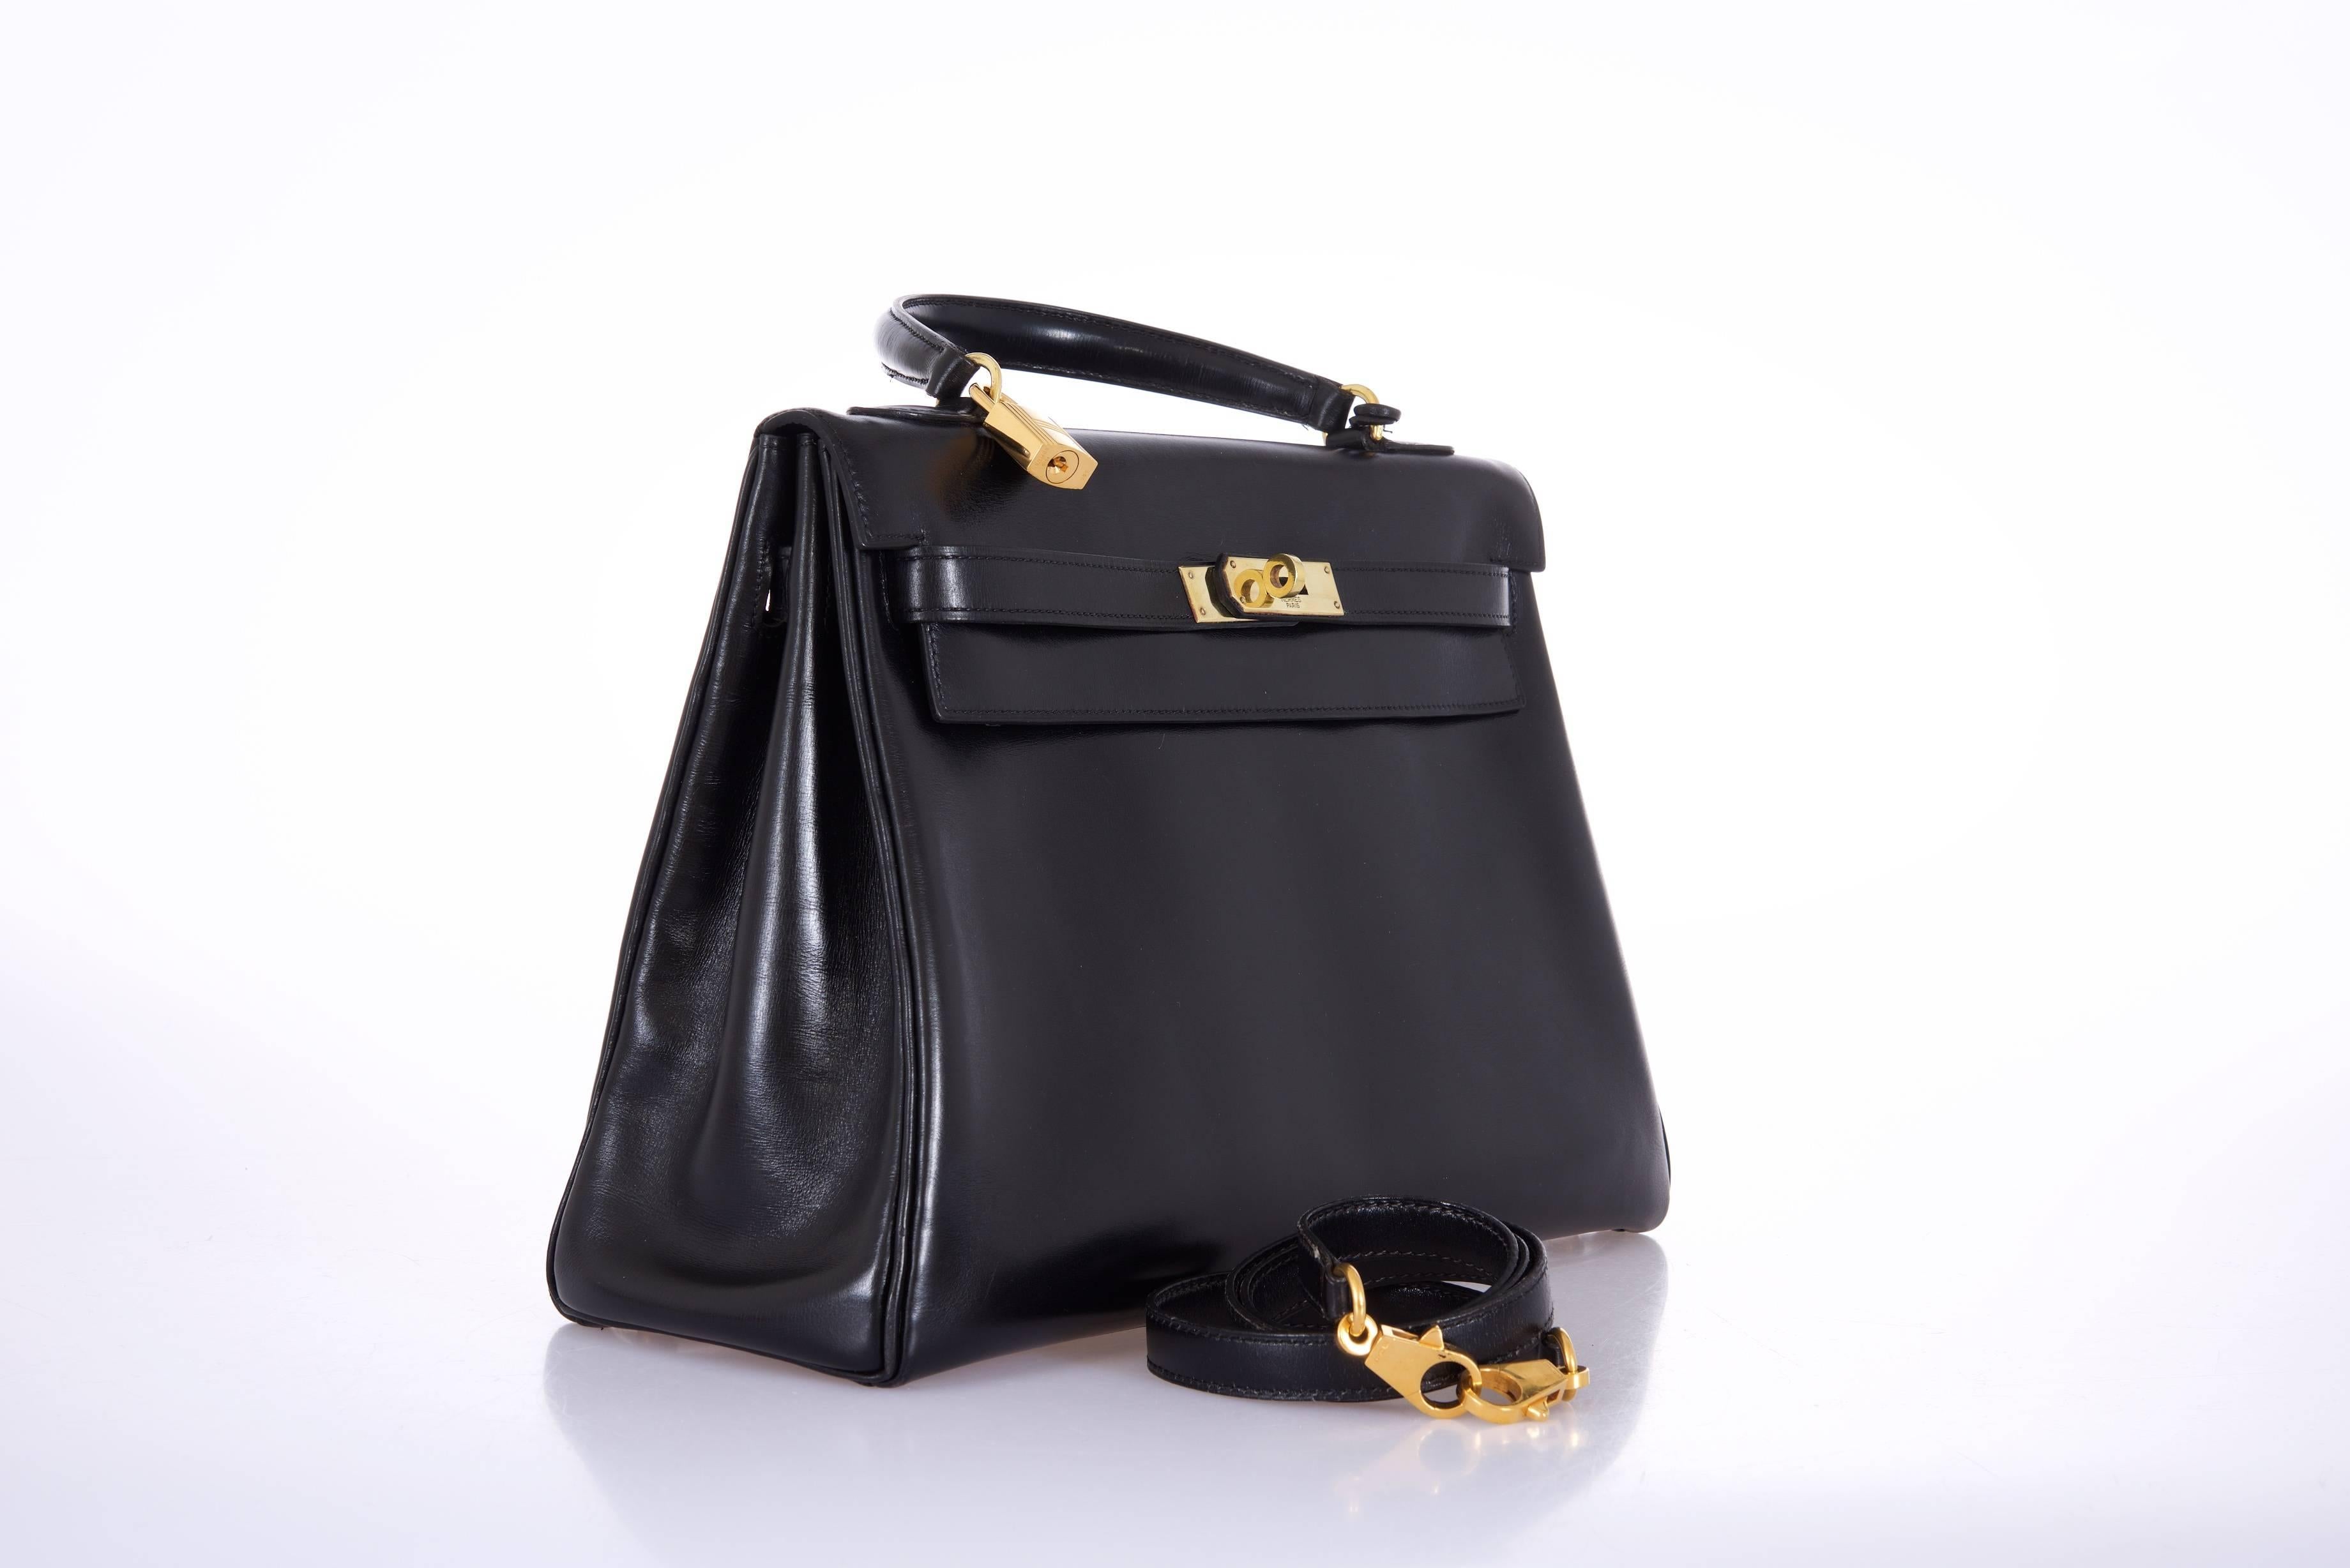 HERMES Kelly Bag 28cm Black Box with Gold hardware Love this bag!

Very good

 

Very Rare Black Box in size 32cm Kelly is constructed of black Box leather which is noted for having a fine grain and a smooth, shiny texture with gold plated hardware.